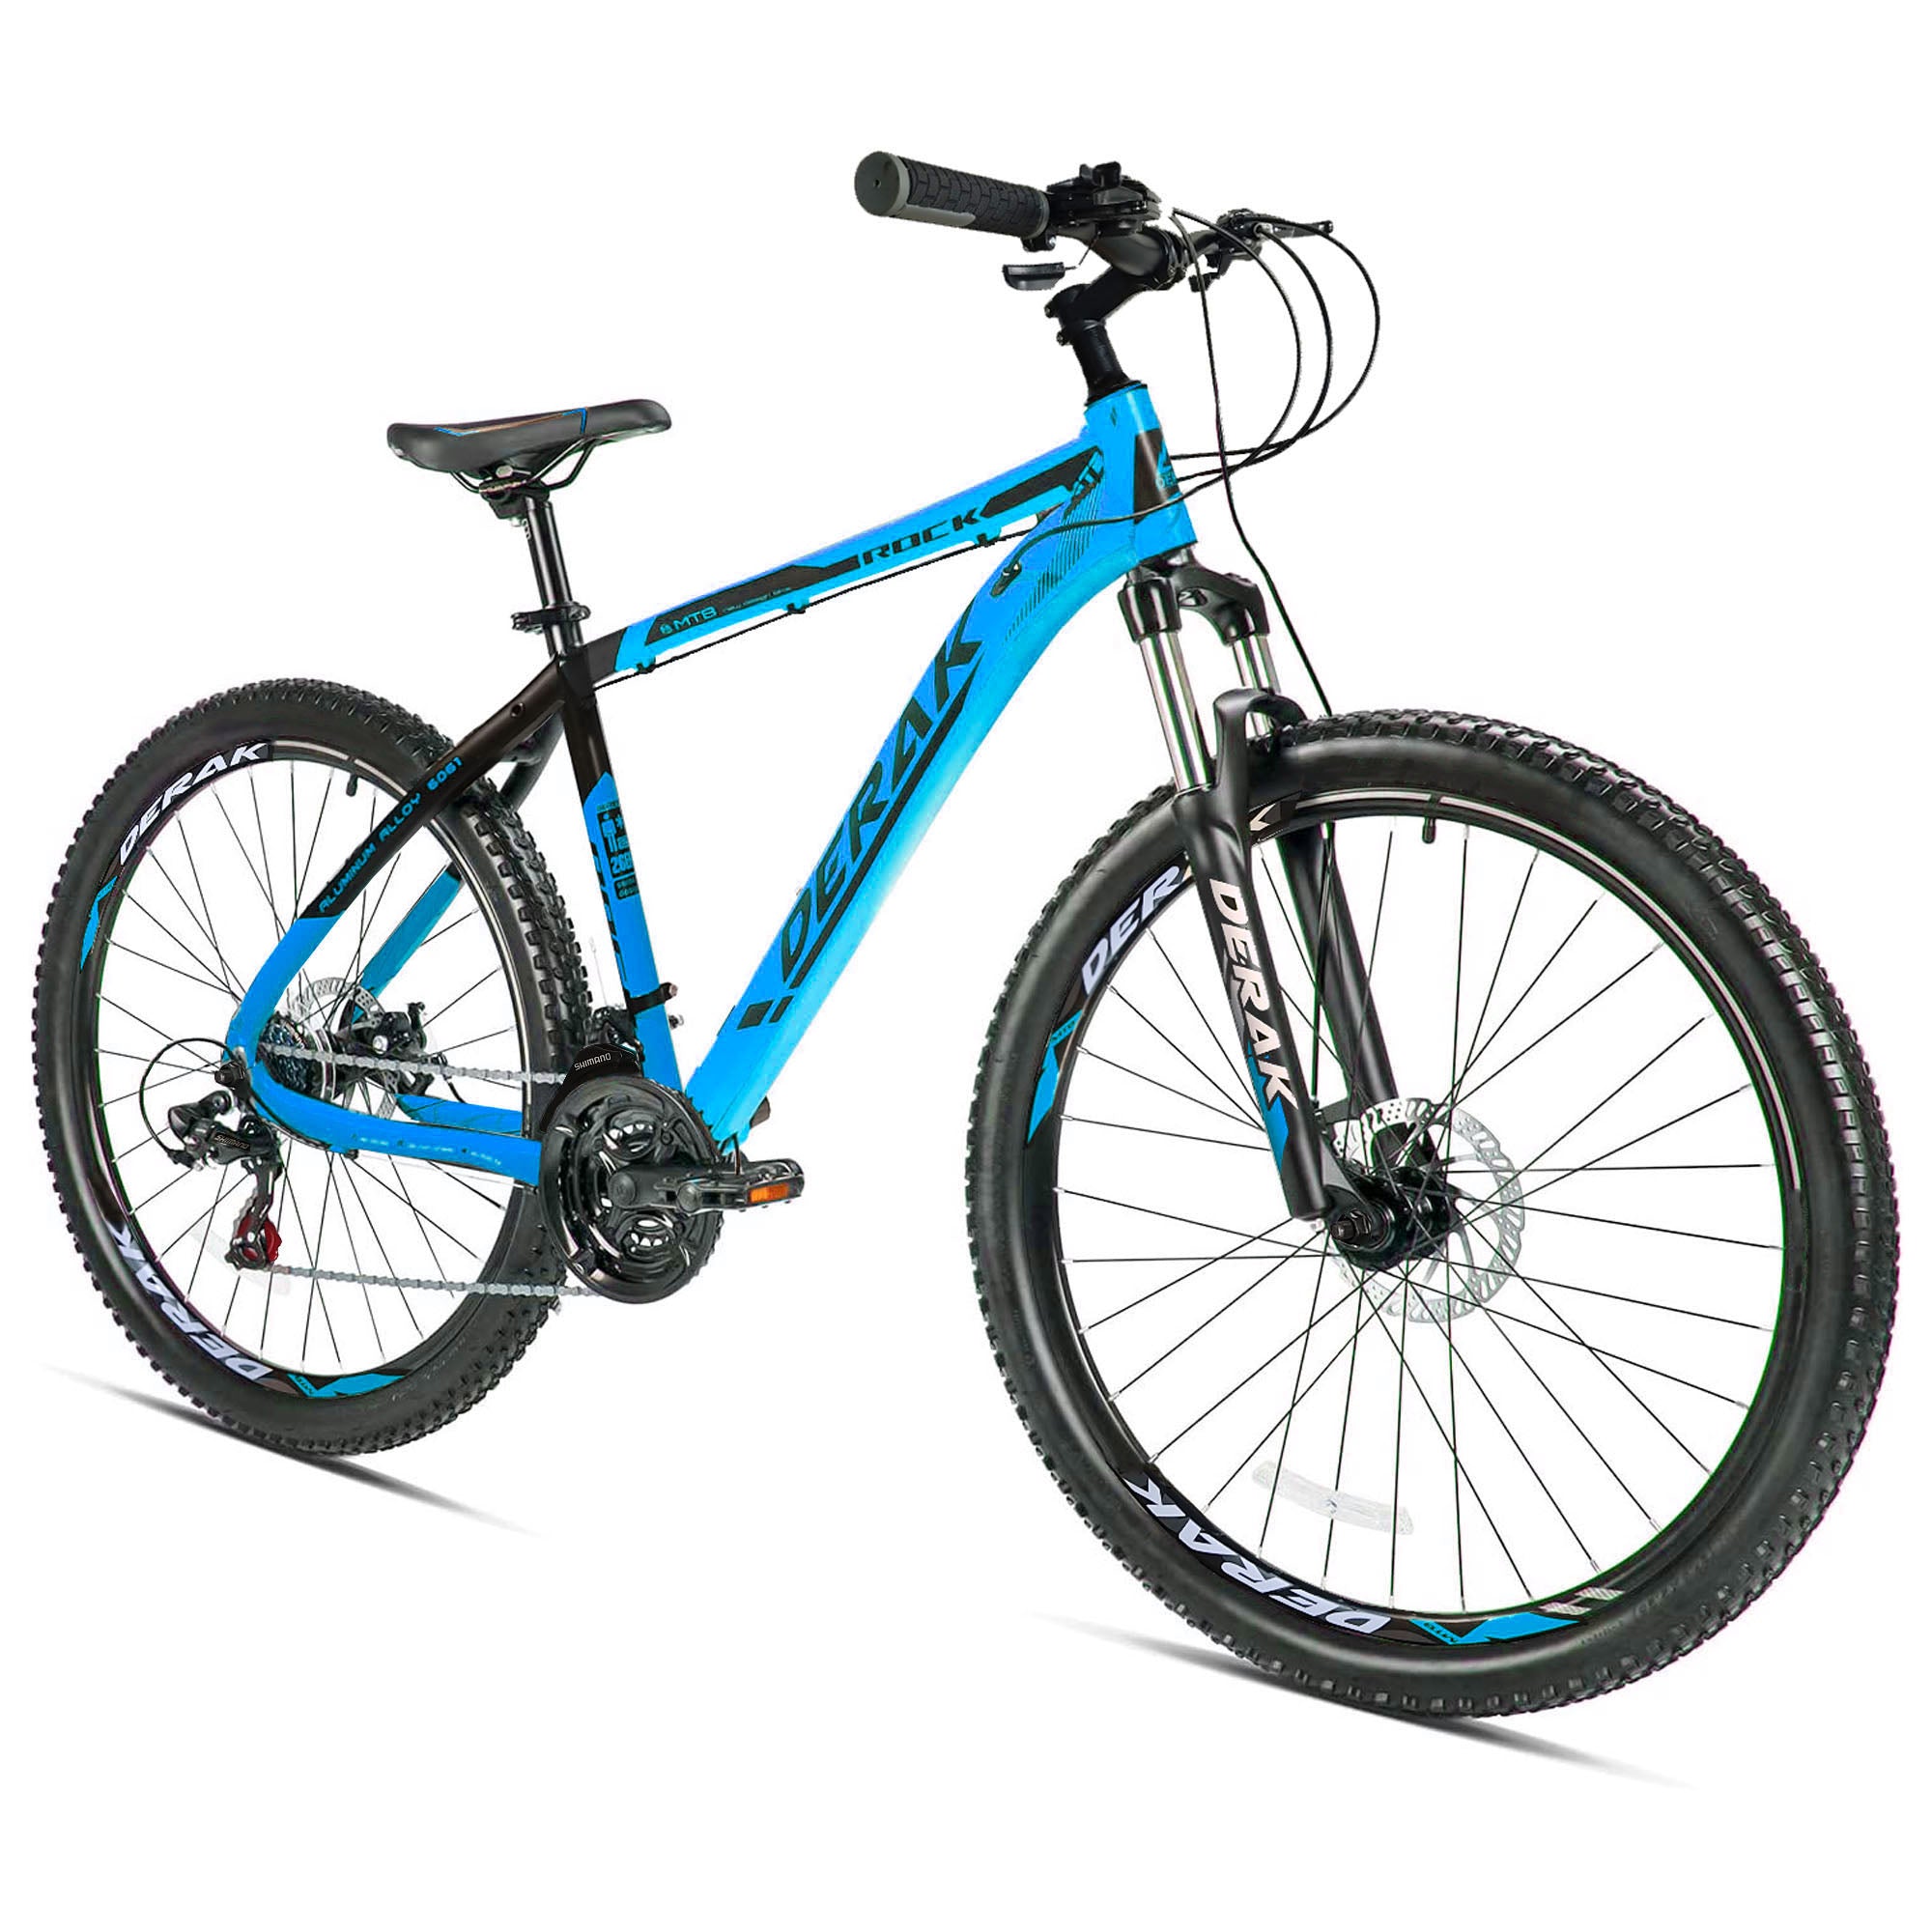 Rock Aluminum Bicycle Adults 26 Inch Blue (100% Assembled)